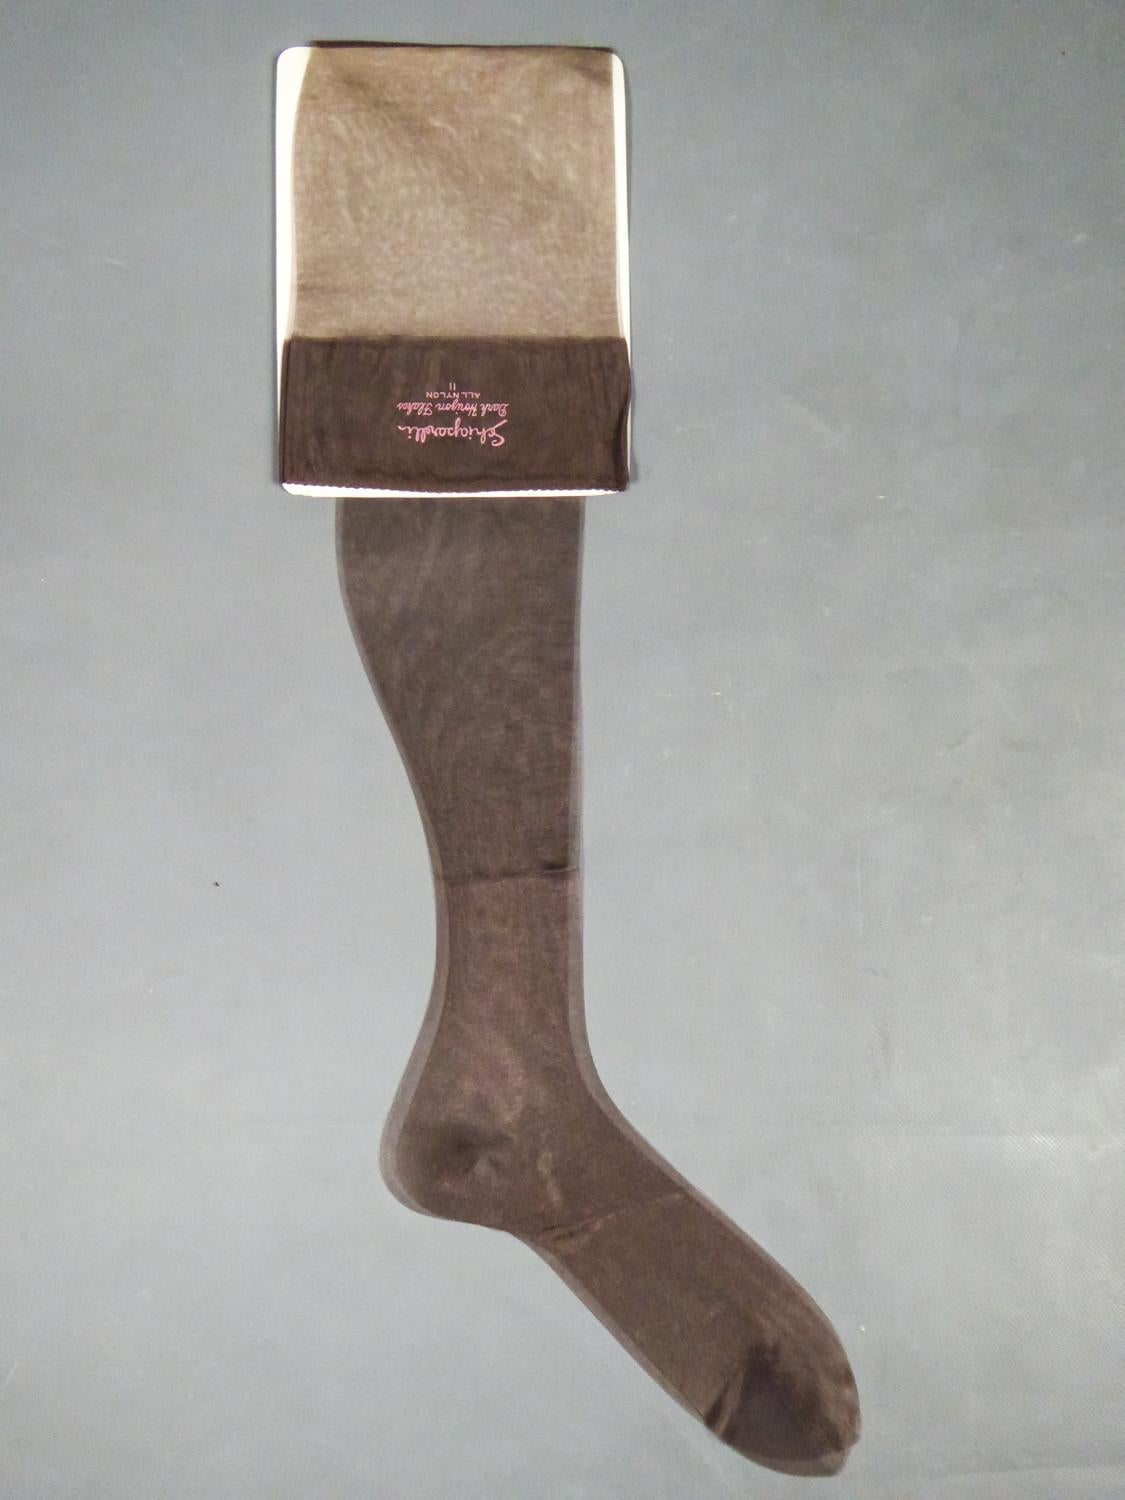 Circa 1958
United States

Pair of stockings by Elsa Schiaparelli in original box, as new, collector's item dating from the late 1950s in the United States. Pair of brown nylon stockings with the famous Schocking Pink graphics indicating Schiaparelli